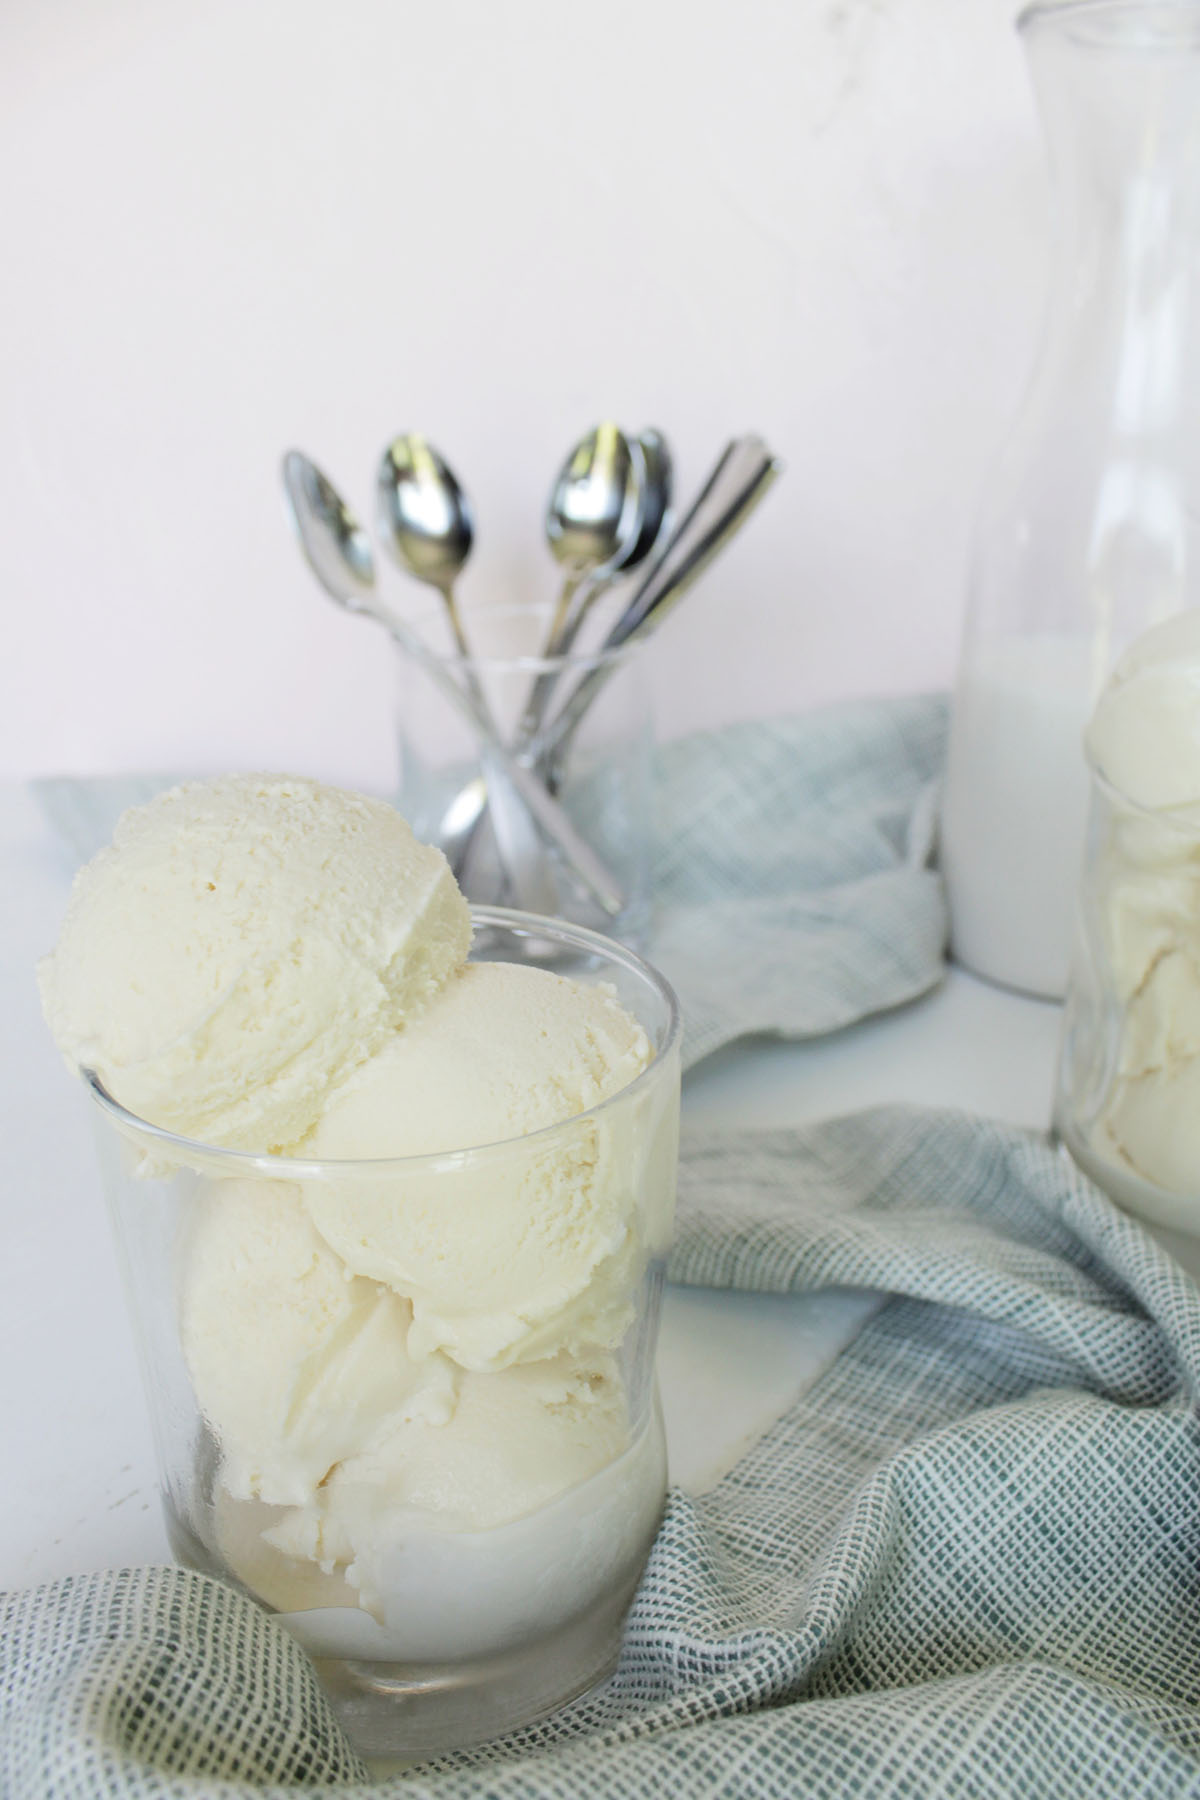 vanilla ice cream scoops in a glass cup.